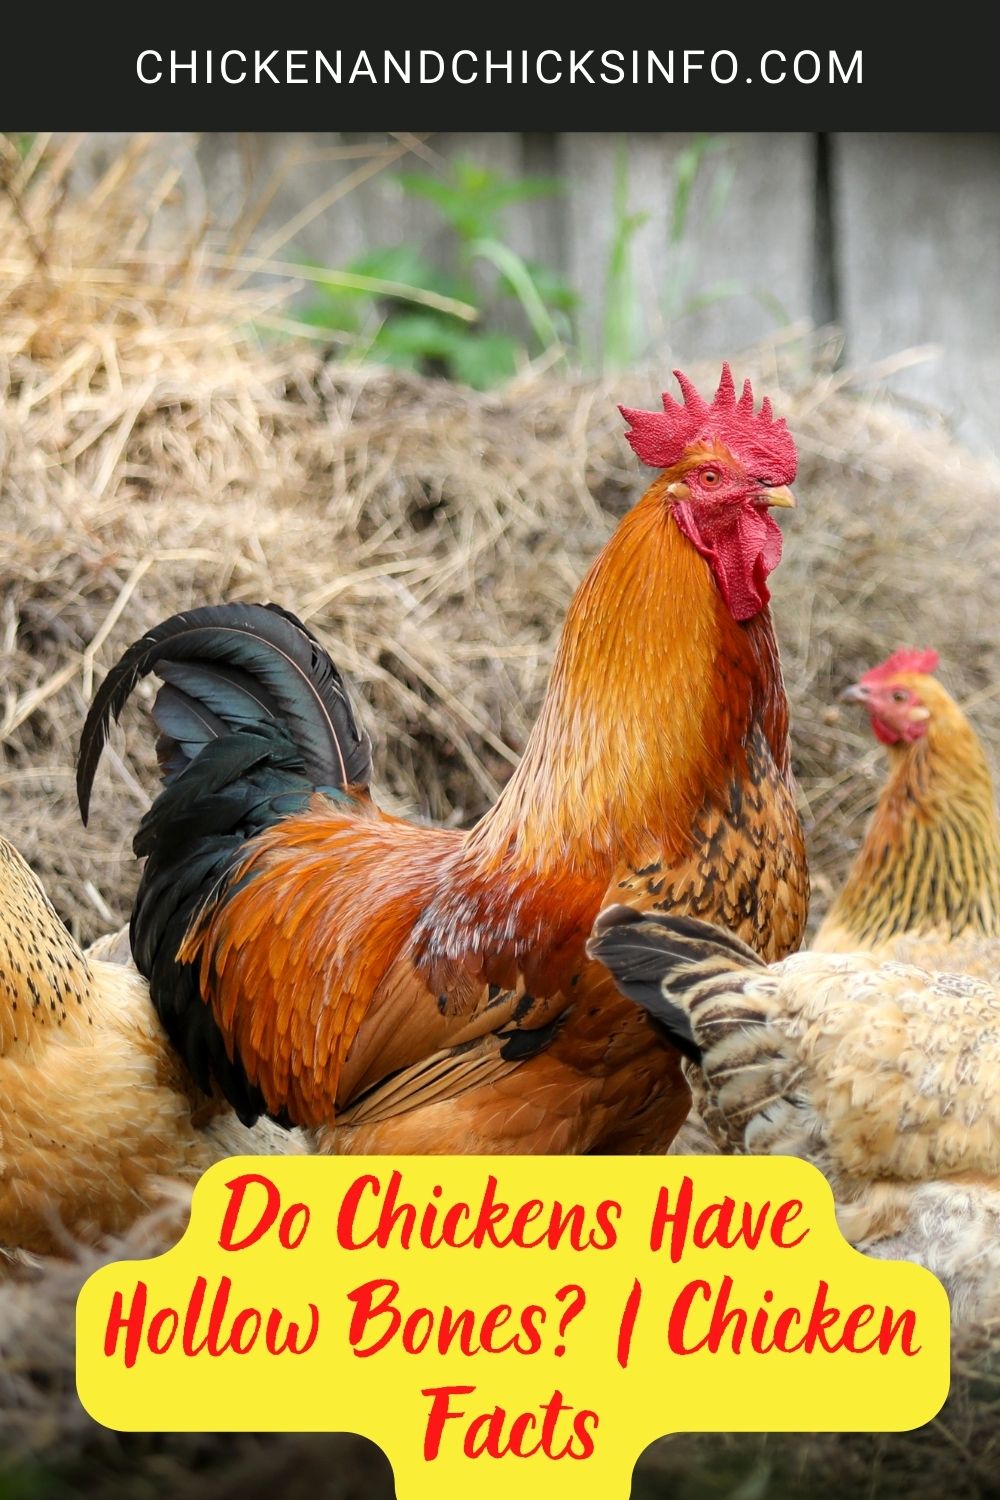 Do Chickens Have Hollow Bones? | Chicken Facts poster.
